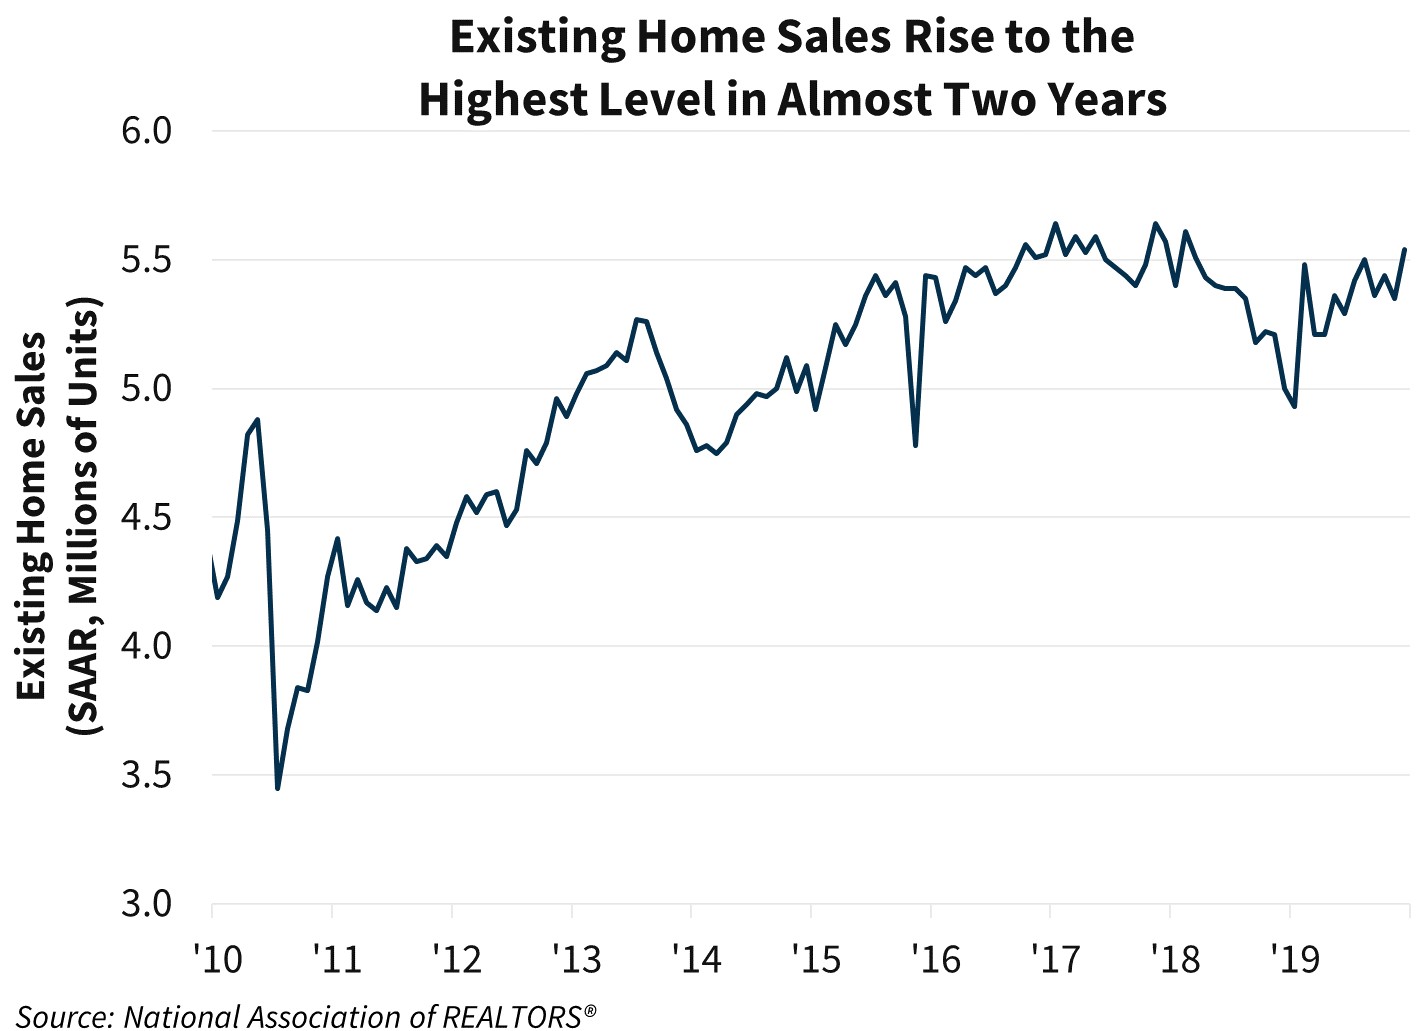 Existing Home Sales Rise to the Highest Level in Almost Two Years